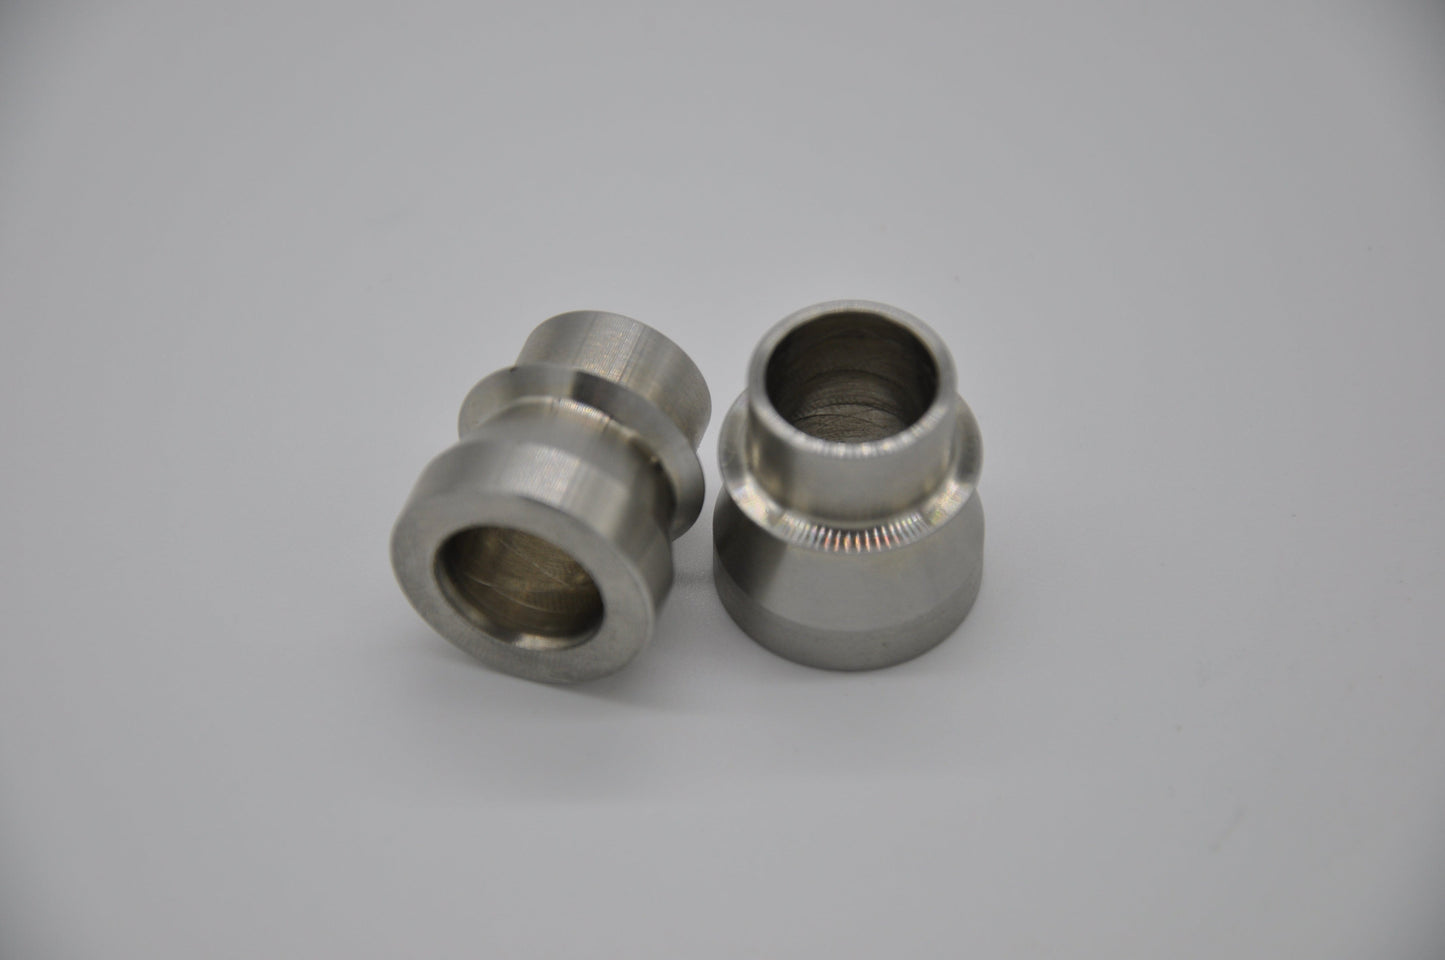 Two 12mm Tall Misalignment Spacers for Can-Am X3 Tie Rods